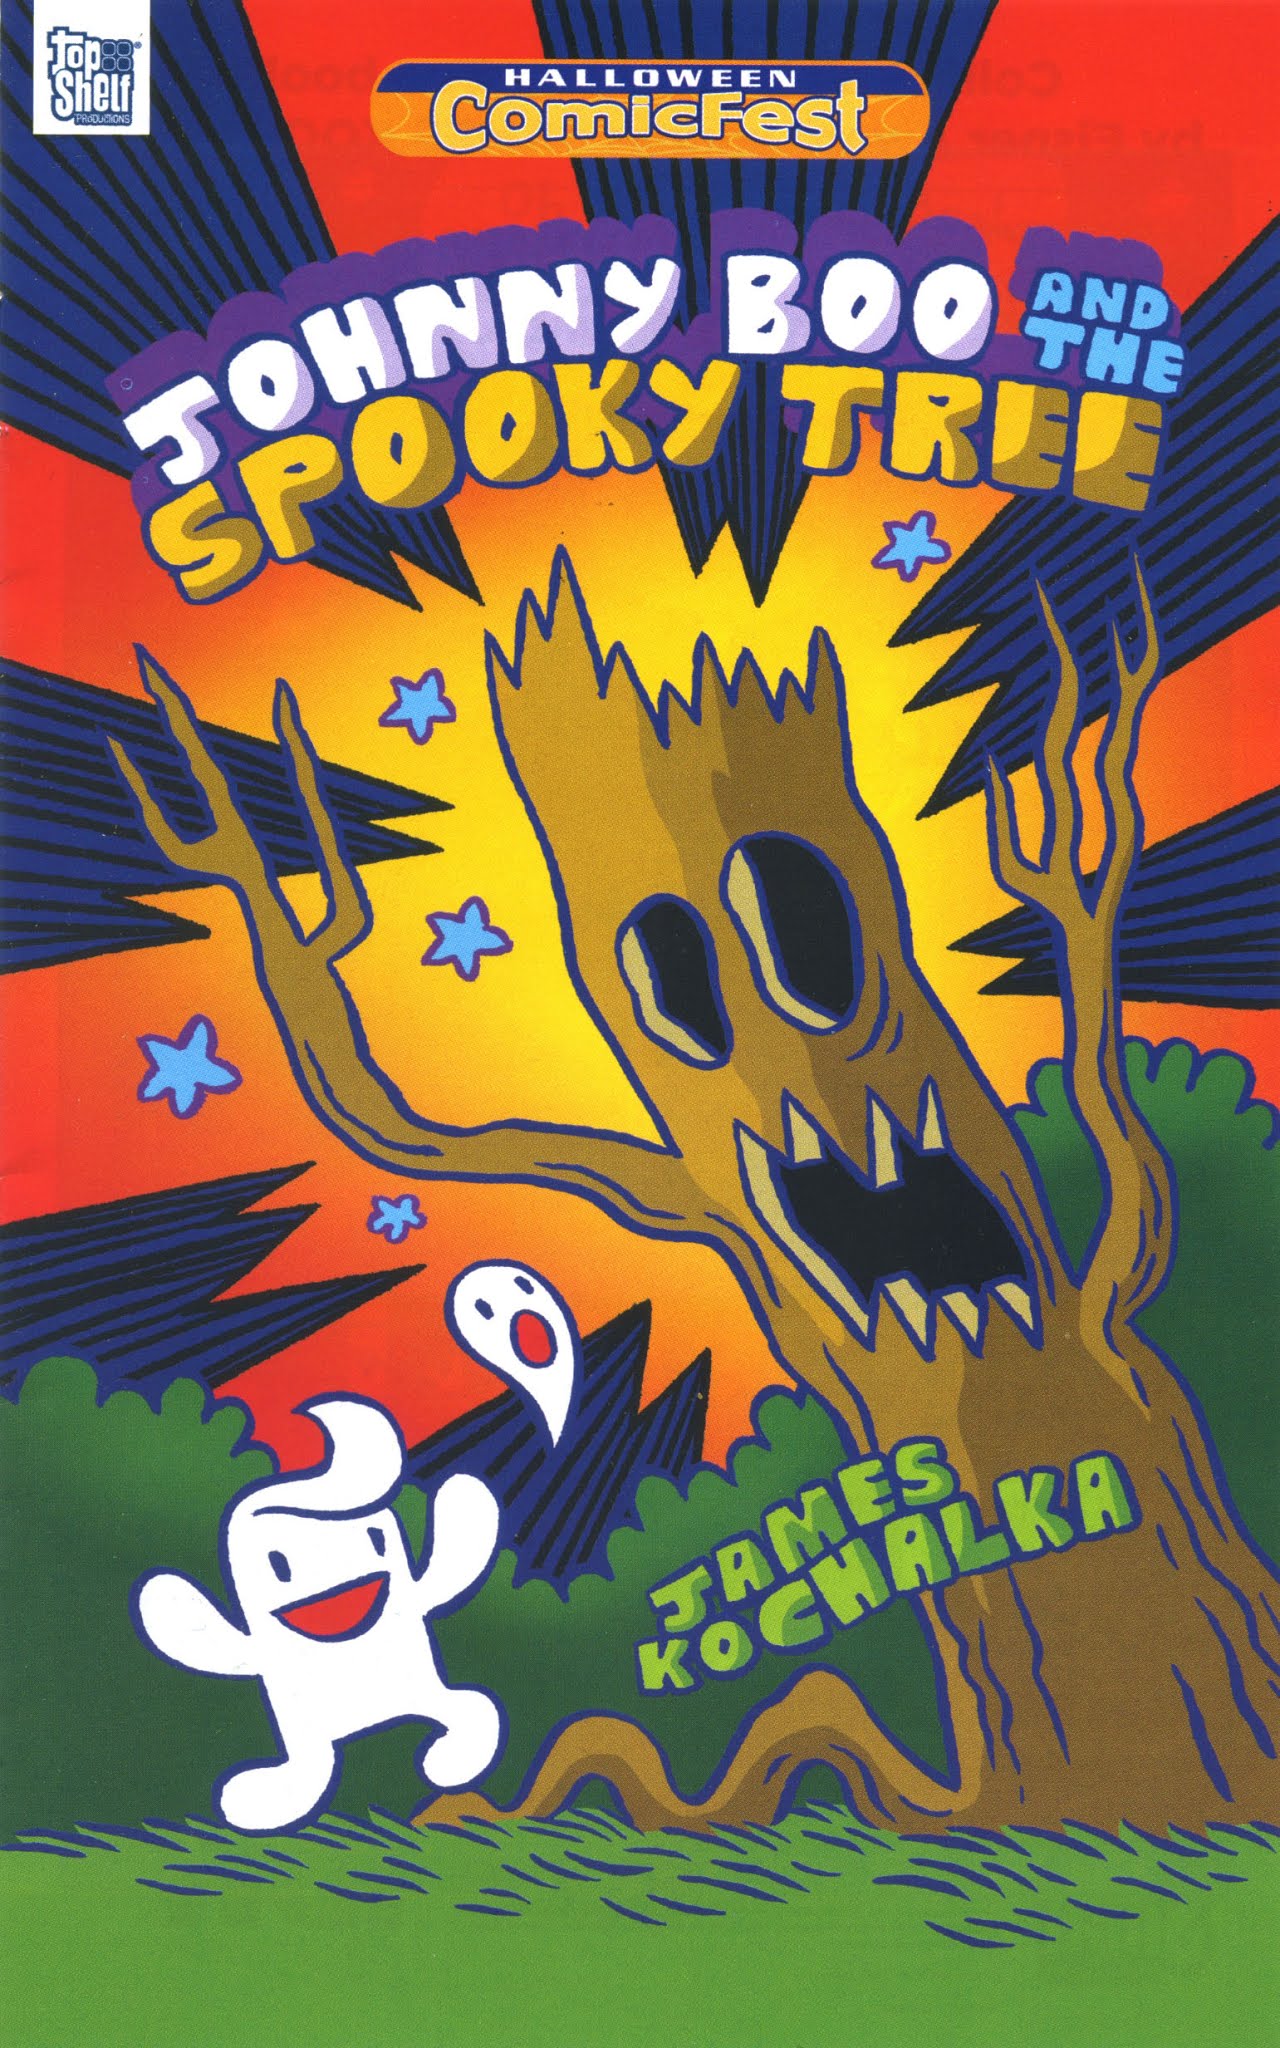 Read online Halloween Comic Fest 2018 comic -  Issue # Johnny Boo and the Spooky Tree - 1